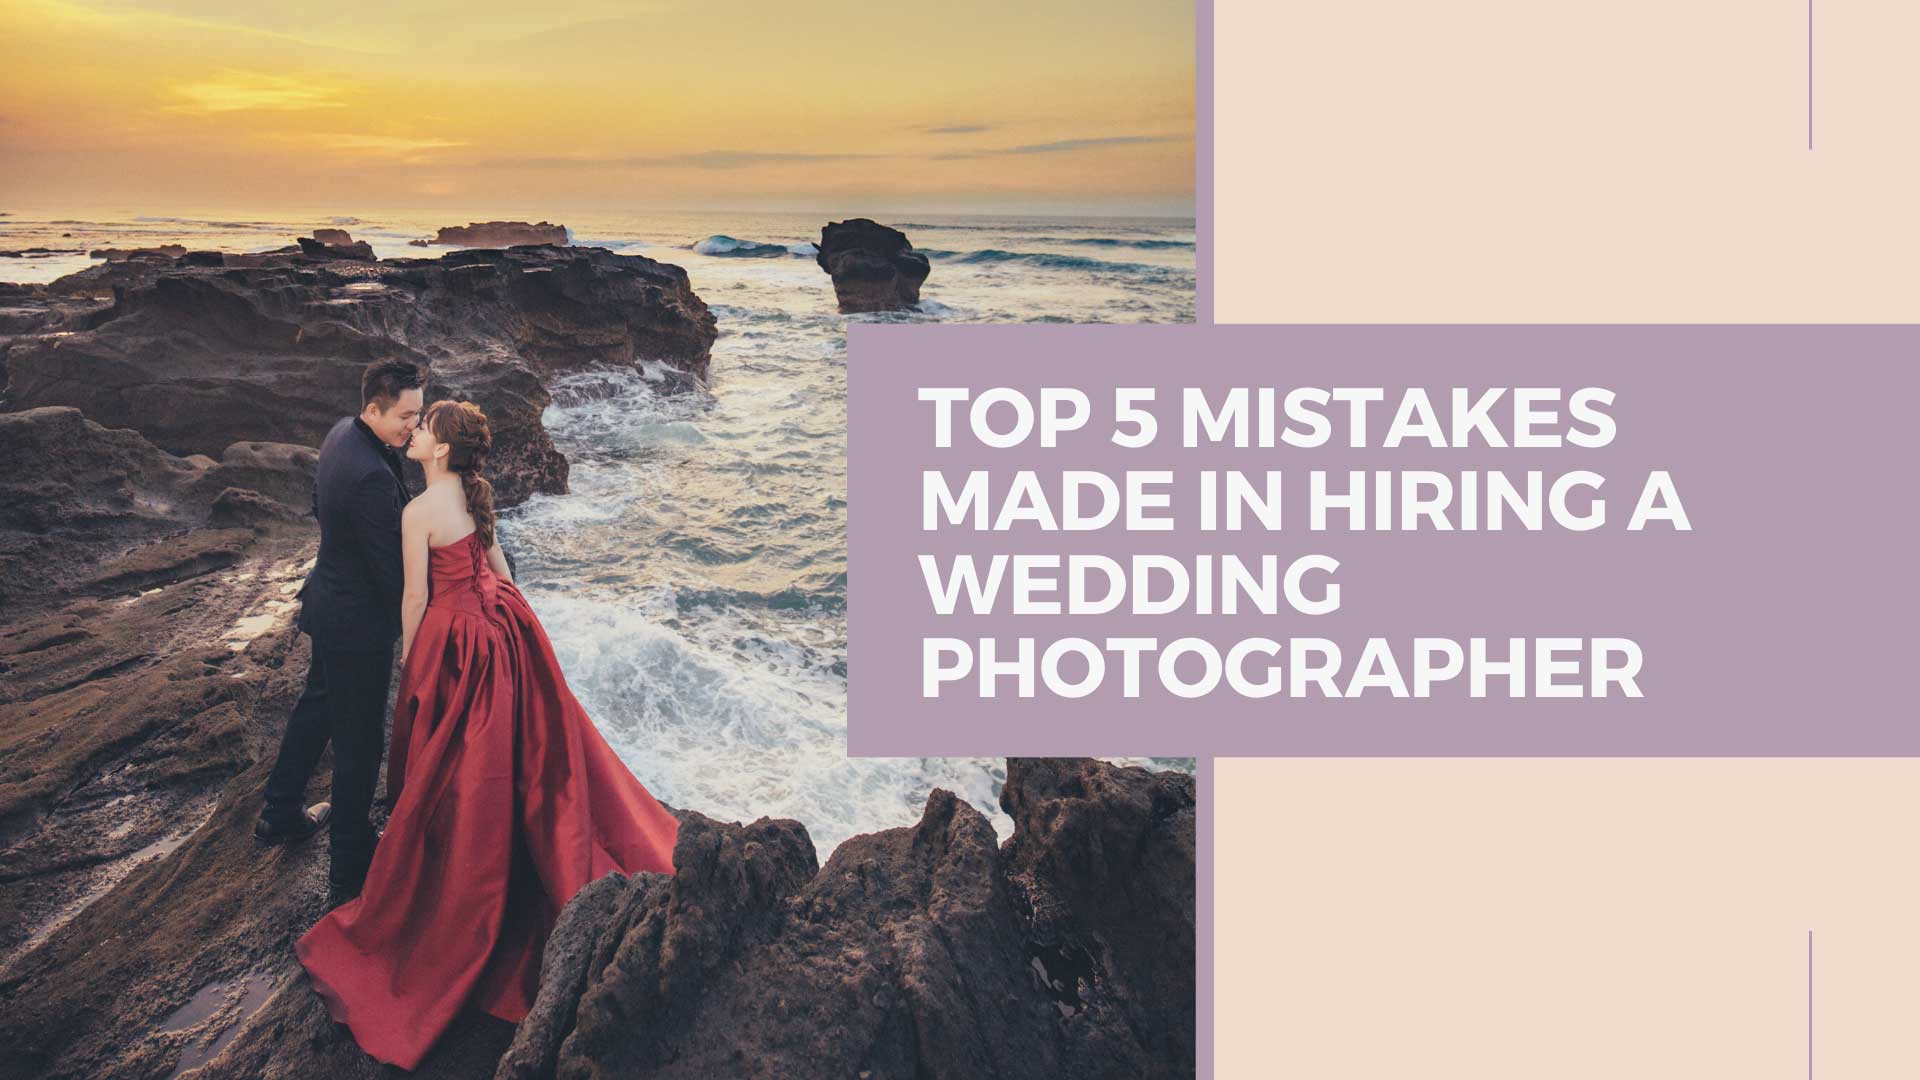 Top 5 Mistakes Made in Hiring a Wedding Photographer